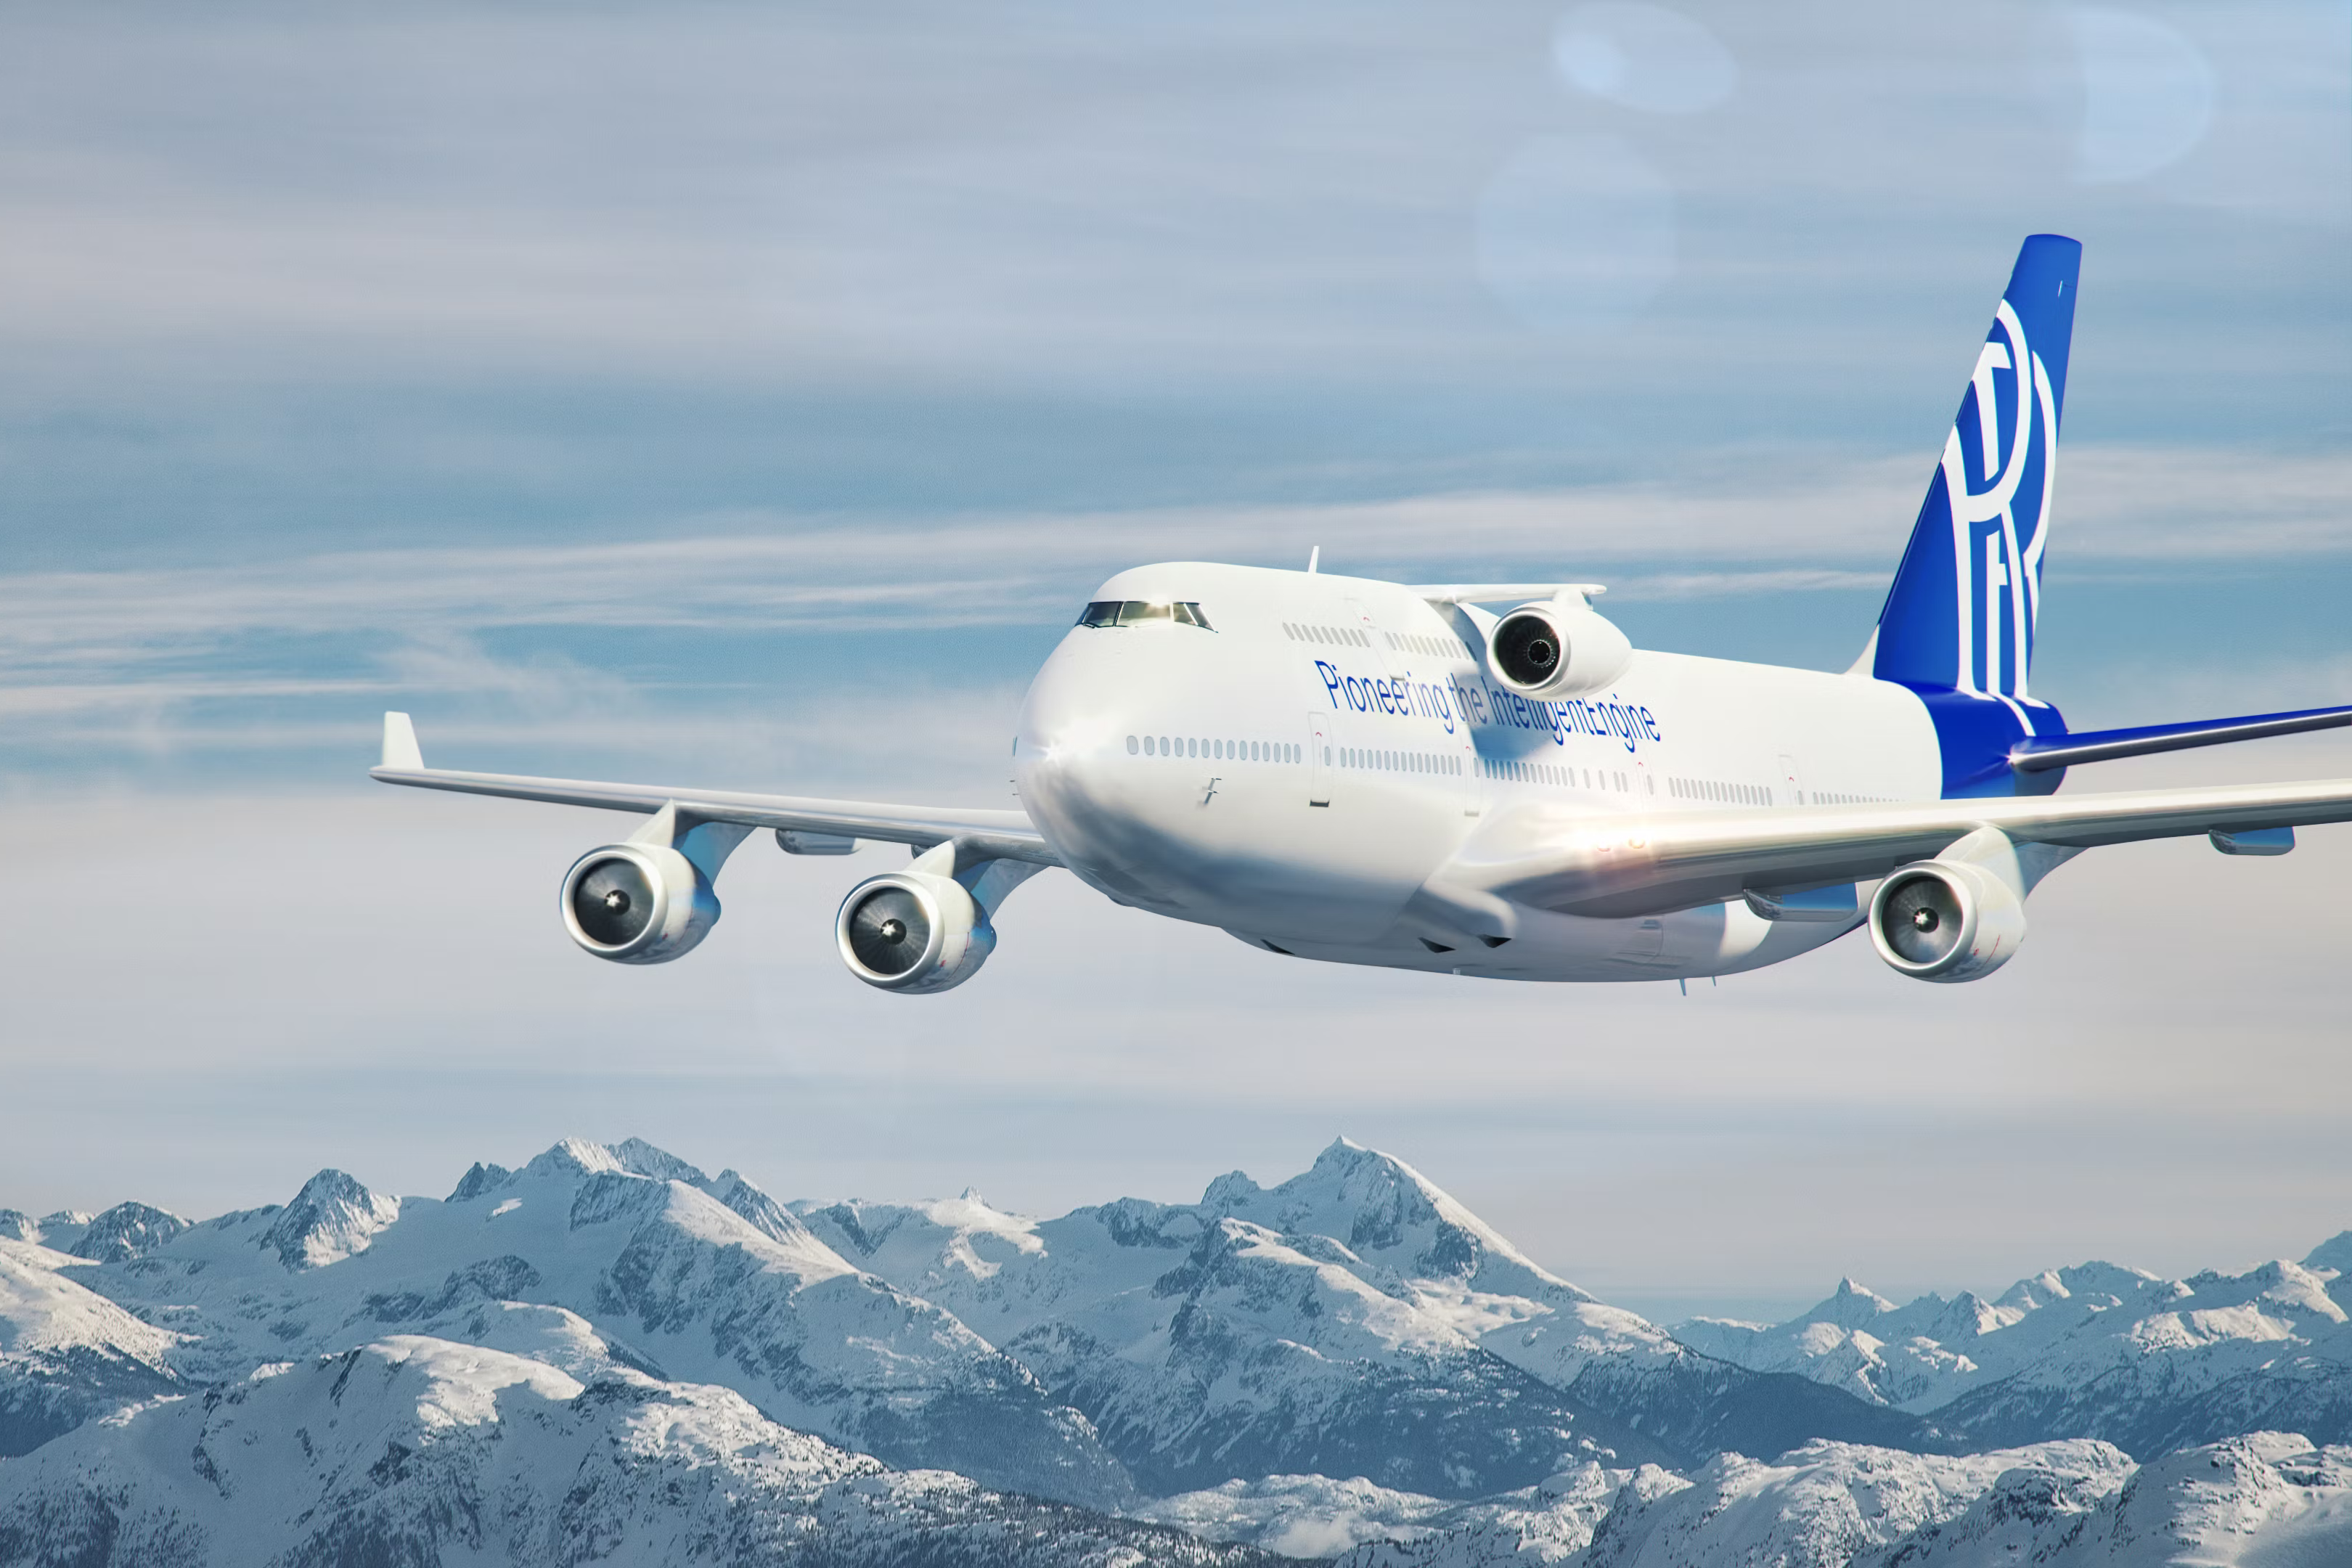 The Rolls-Royce Boeing 747-400 testbed flying over snow-capped mountains.